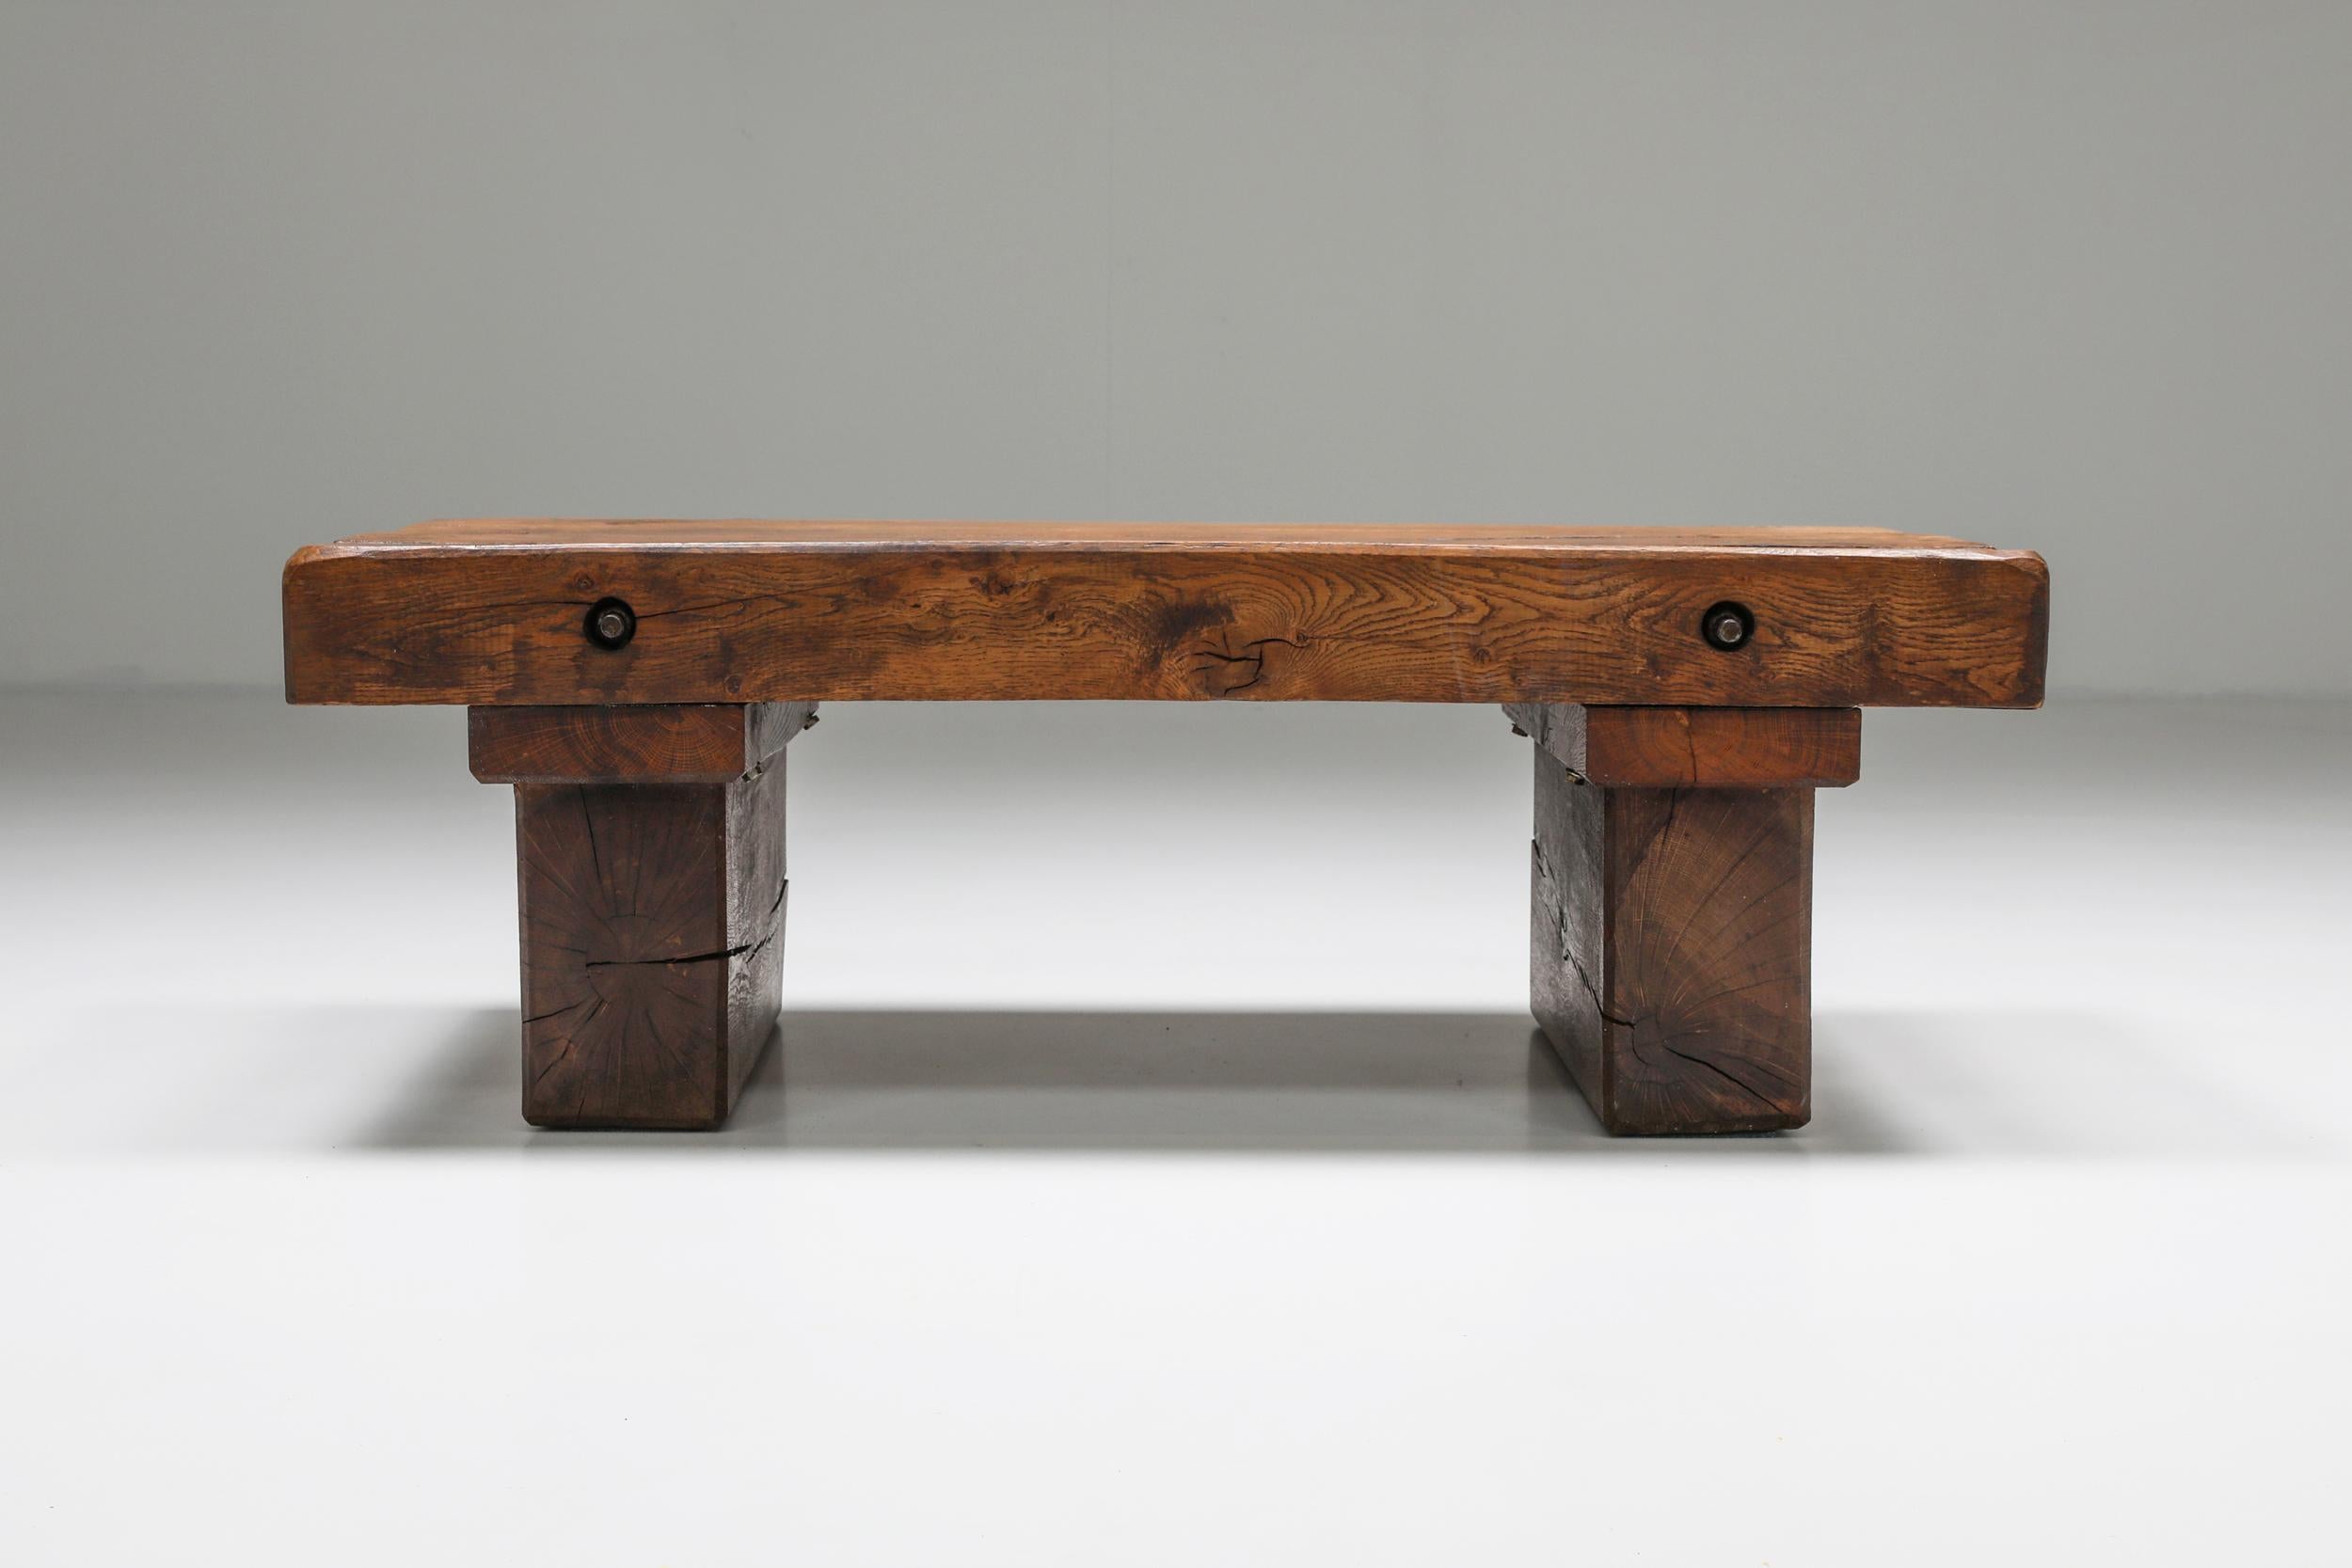 Rustic solid wood coffee table, Mid-Century Modern, French craftsmanship 1950's;

Rustic rectangular coffee table in solid wood made in France in the 1950s. The remarkable charismatic patina brings warmth to any interior in need of a Mid-Century